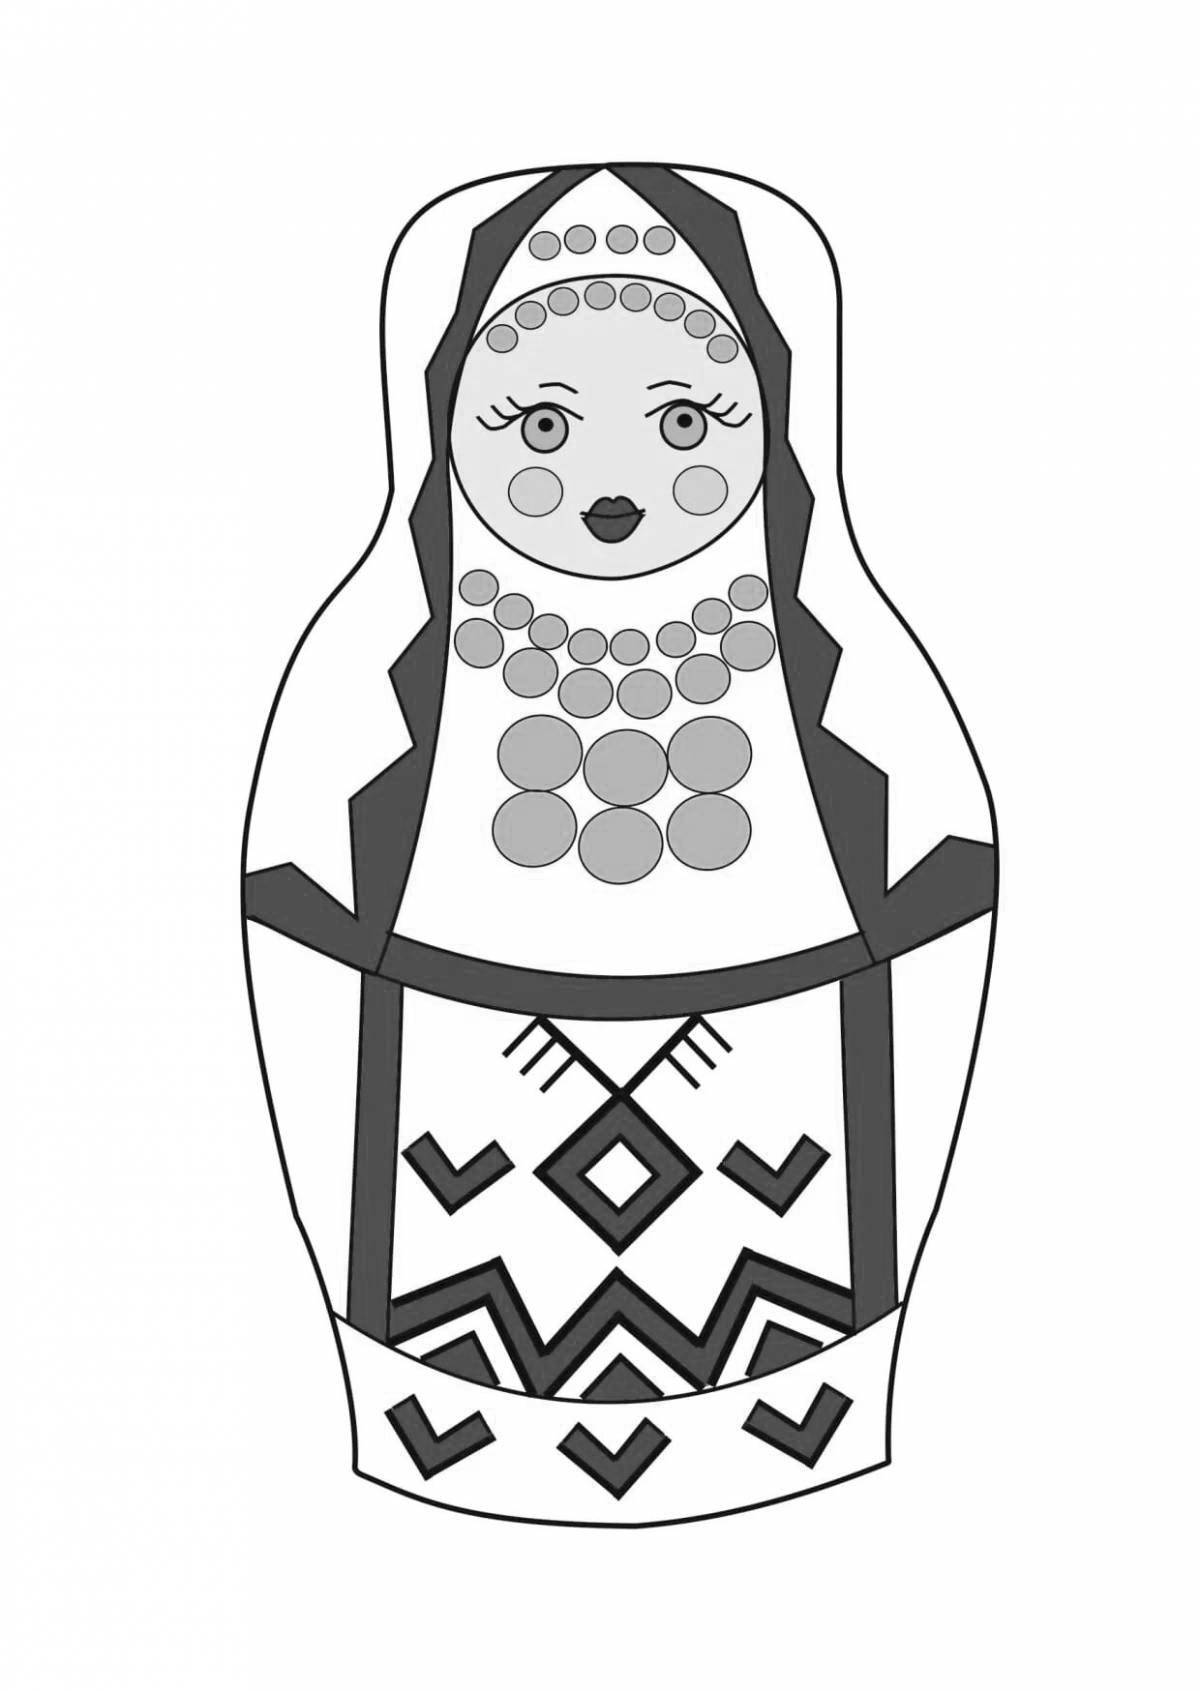 Coloring page charming Udmurt national costume